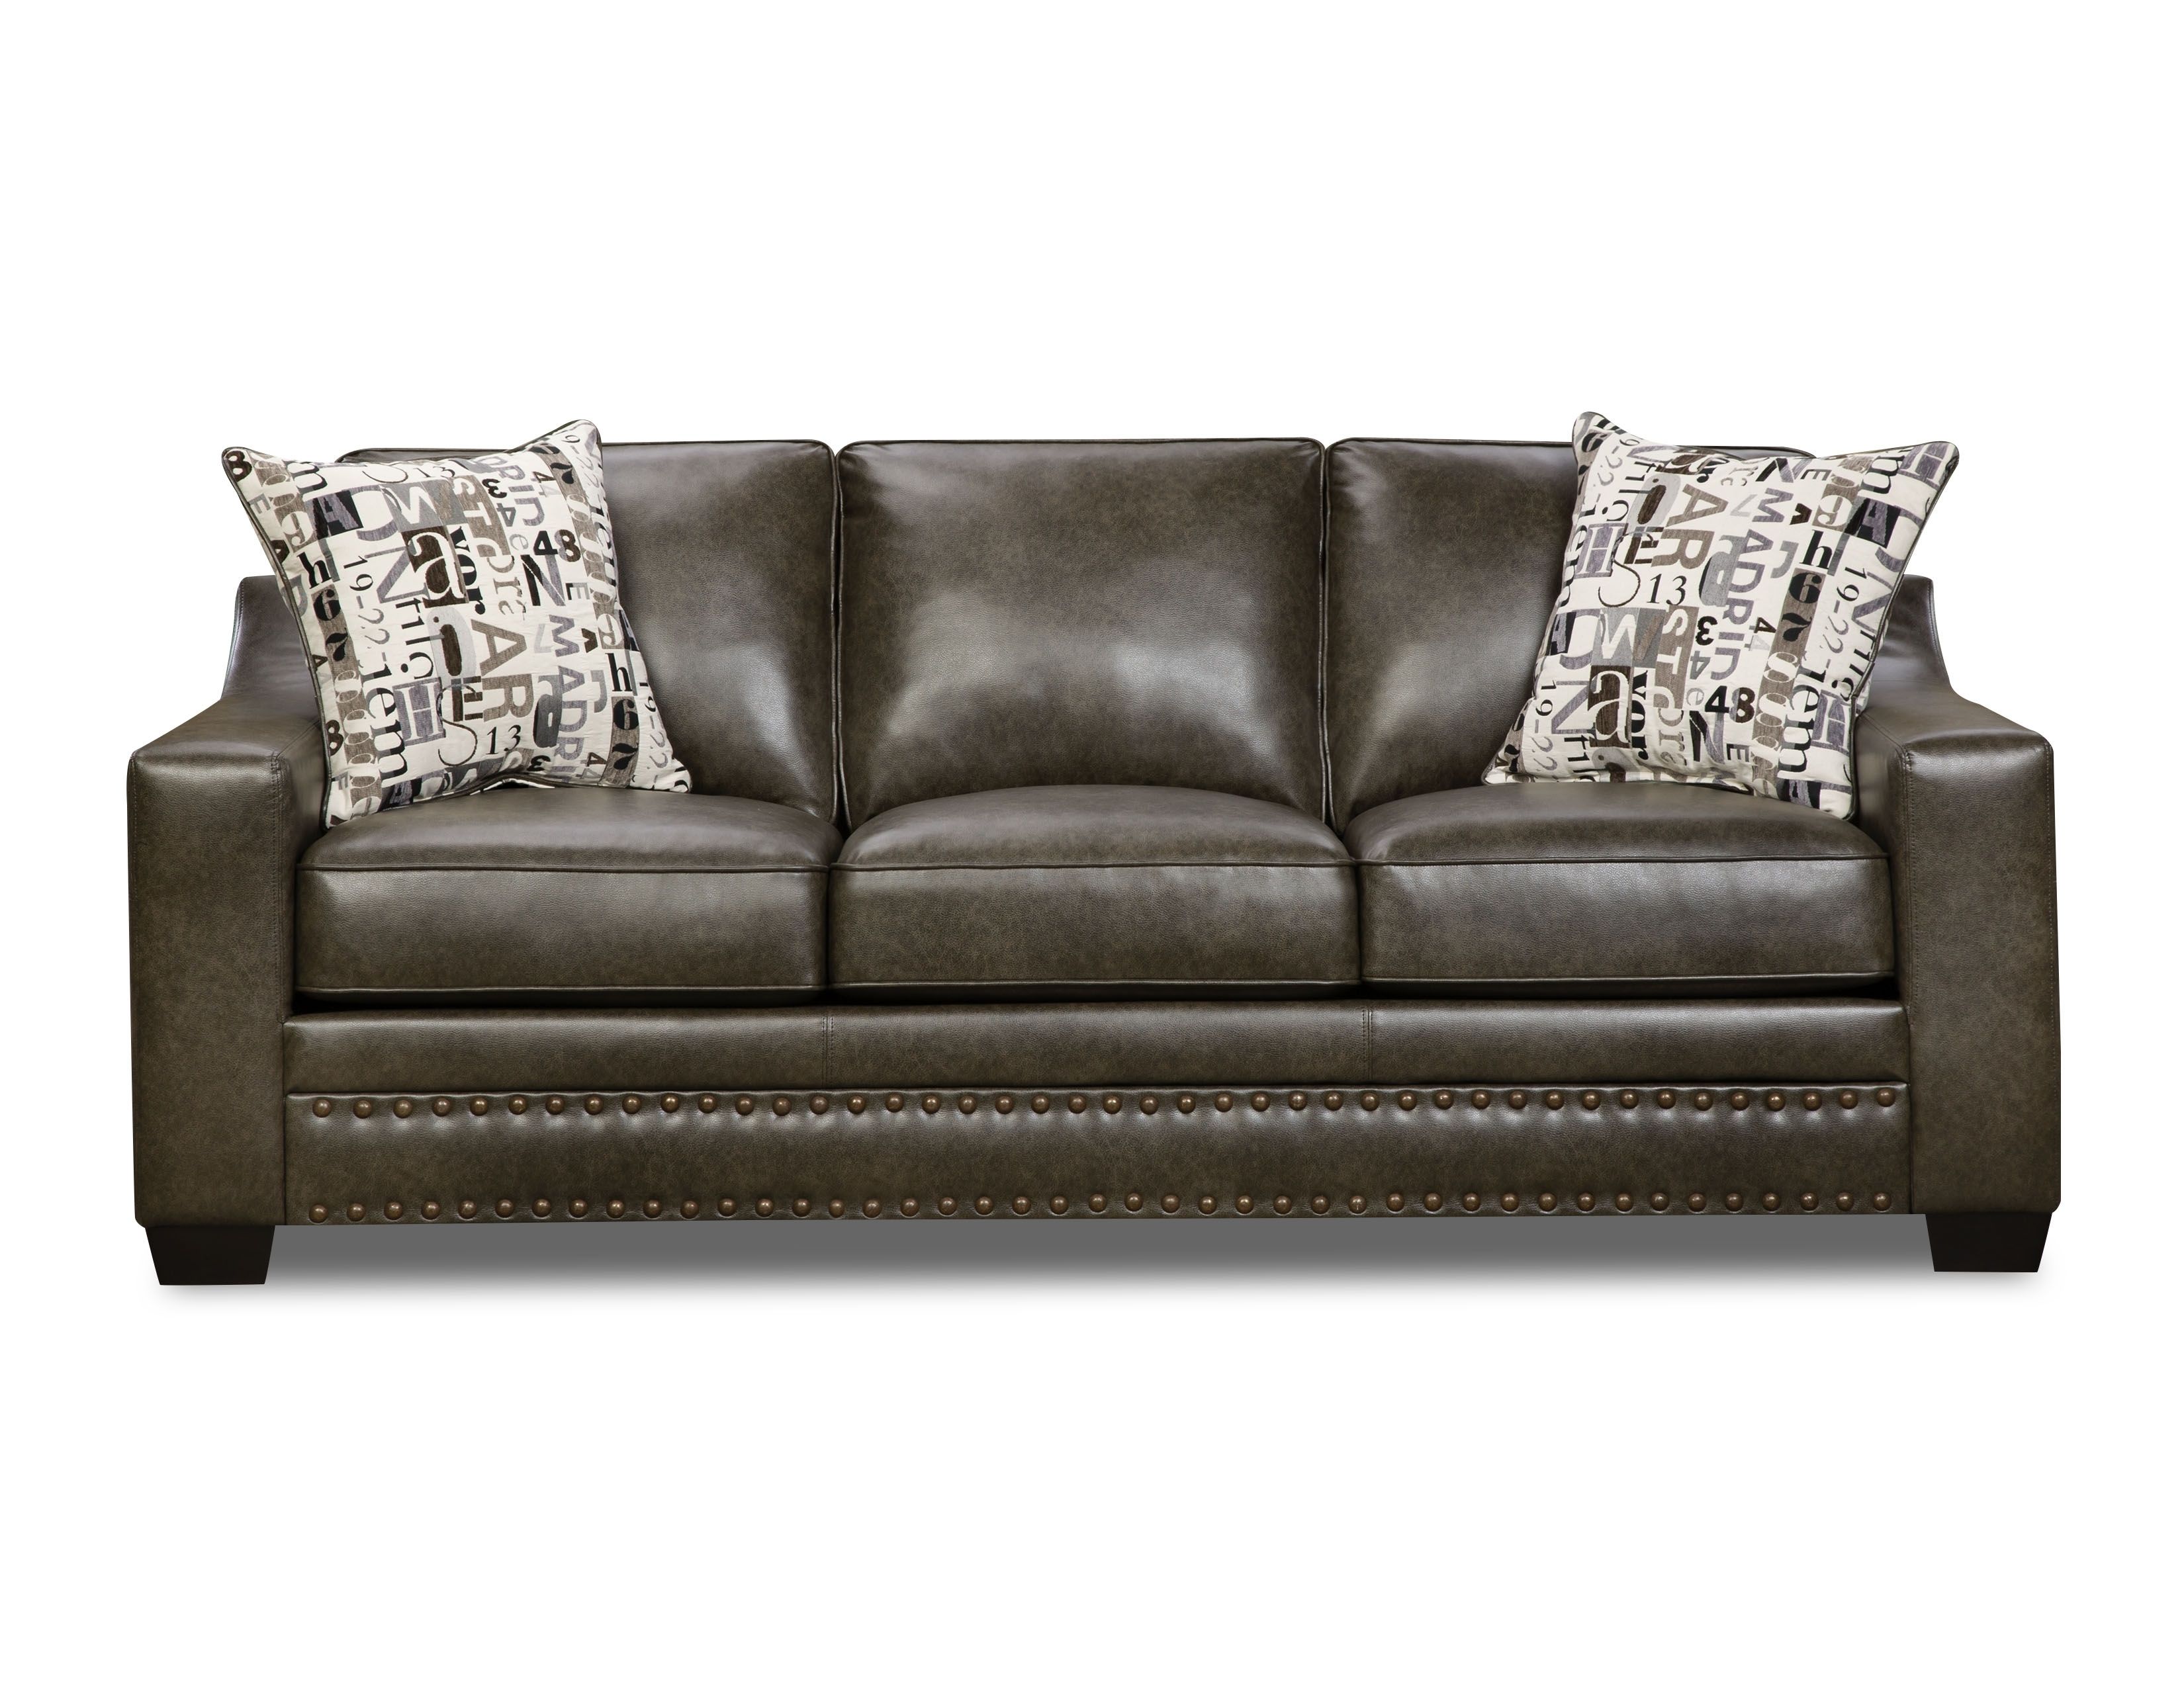 Sectional Sofa Bed Sears E280a2 Sofa Bed Inside Sectional Sofas At Sears 